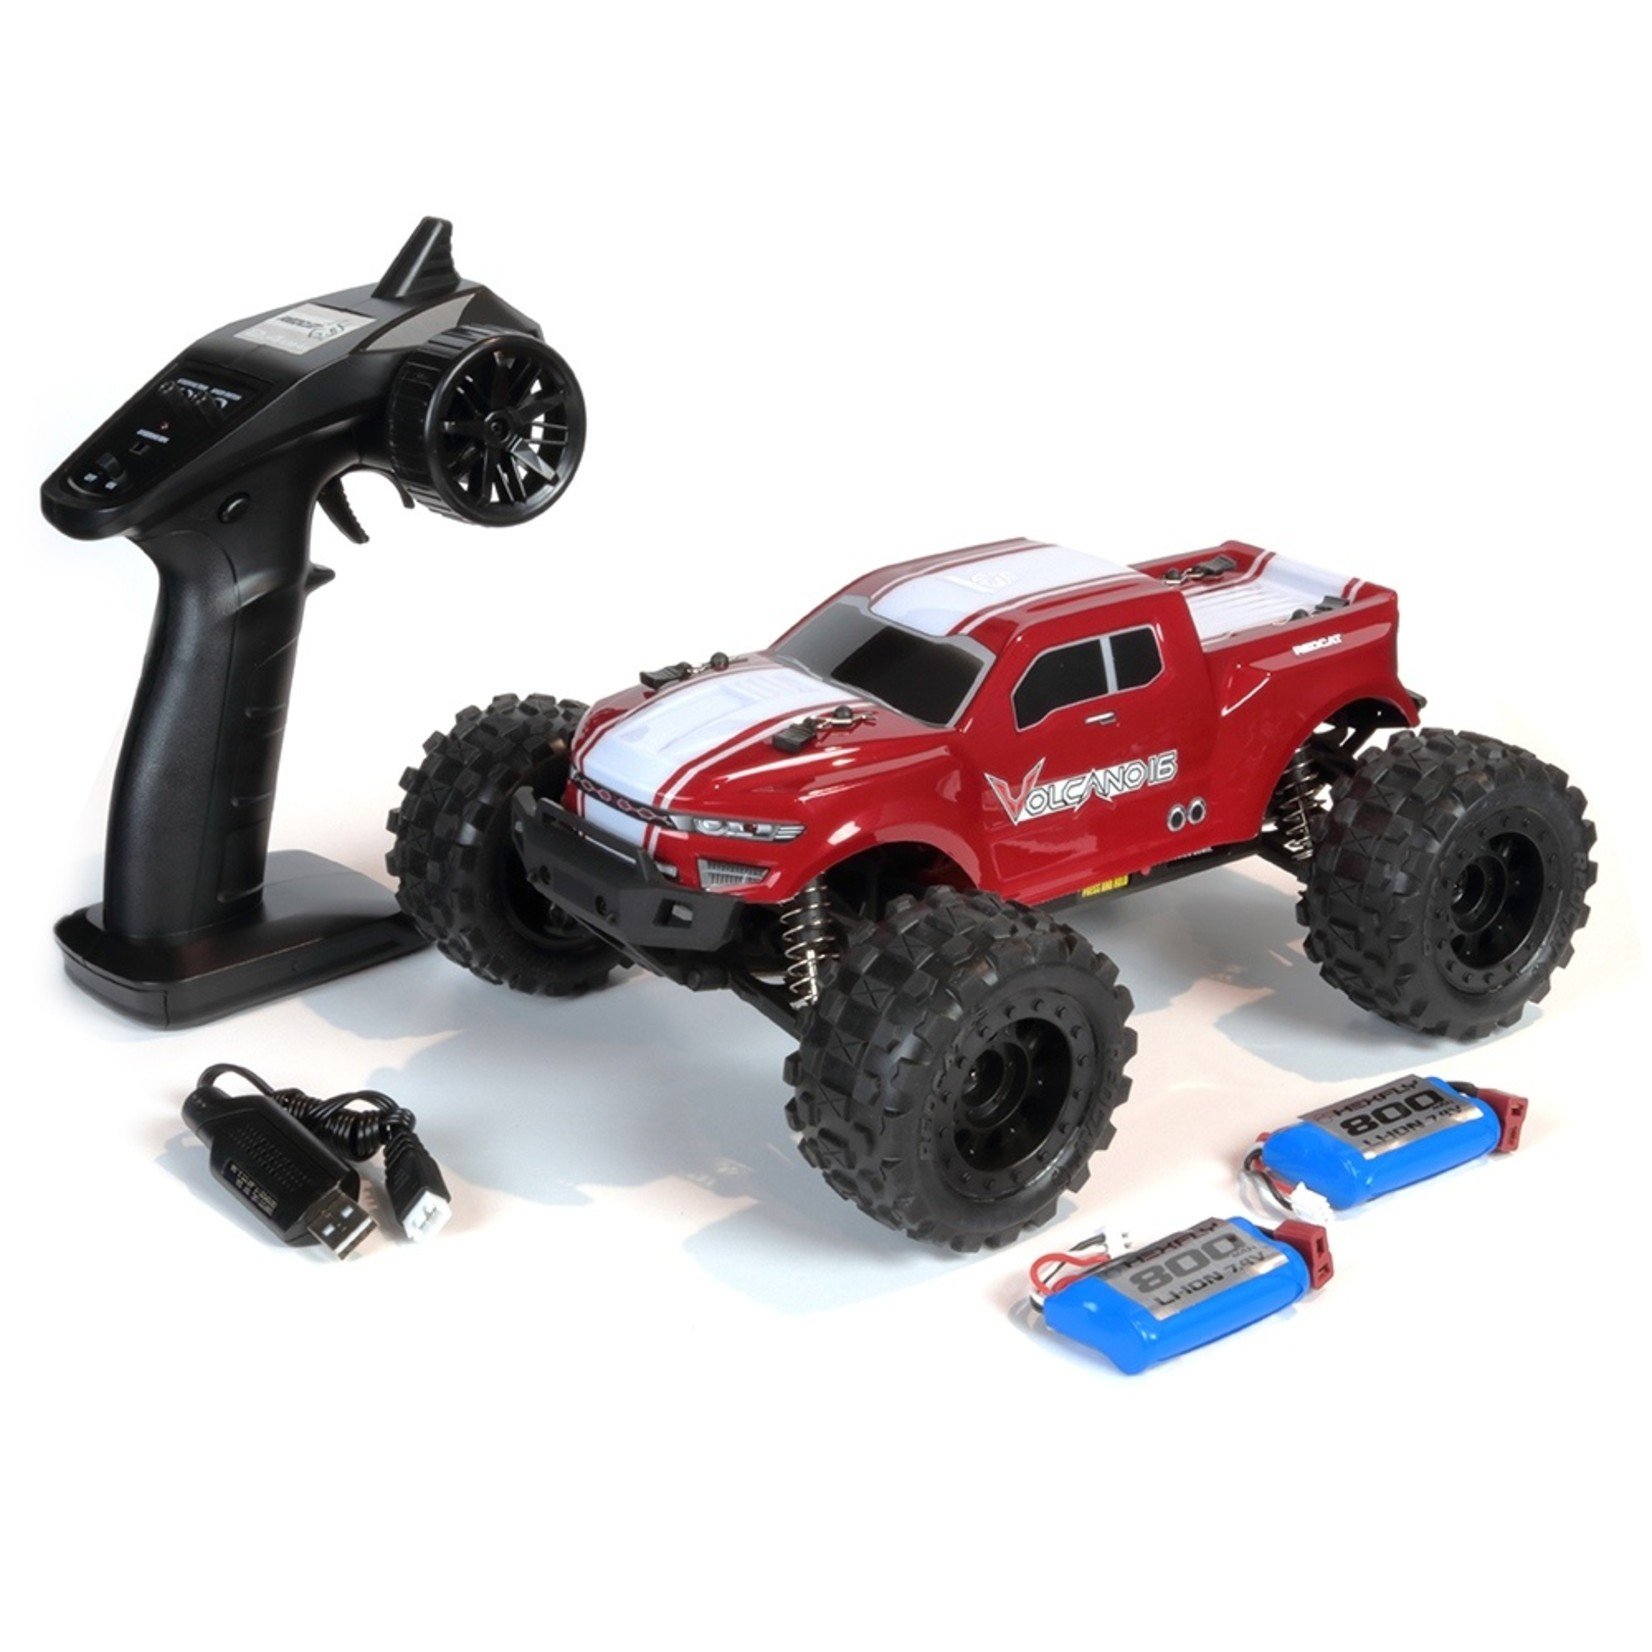 Redcat Racing Redcat Volcano-16 1/16 4WD Brushed RTR Truck (Red) w/2.4GHz Radio #RER13648